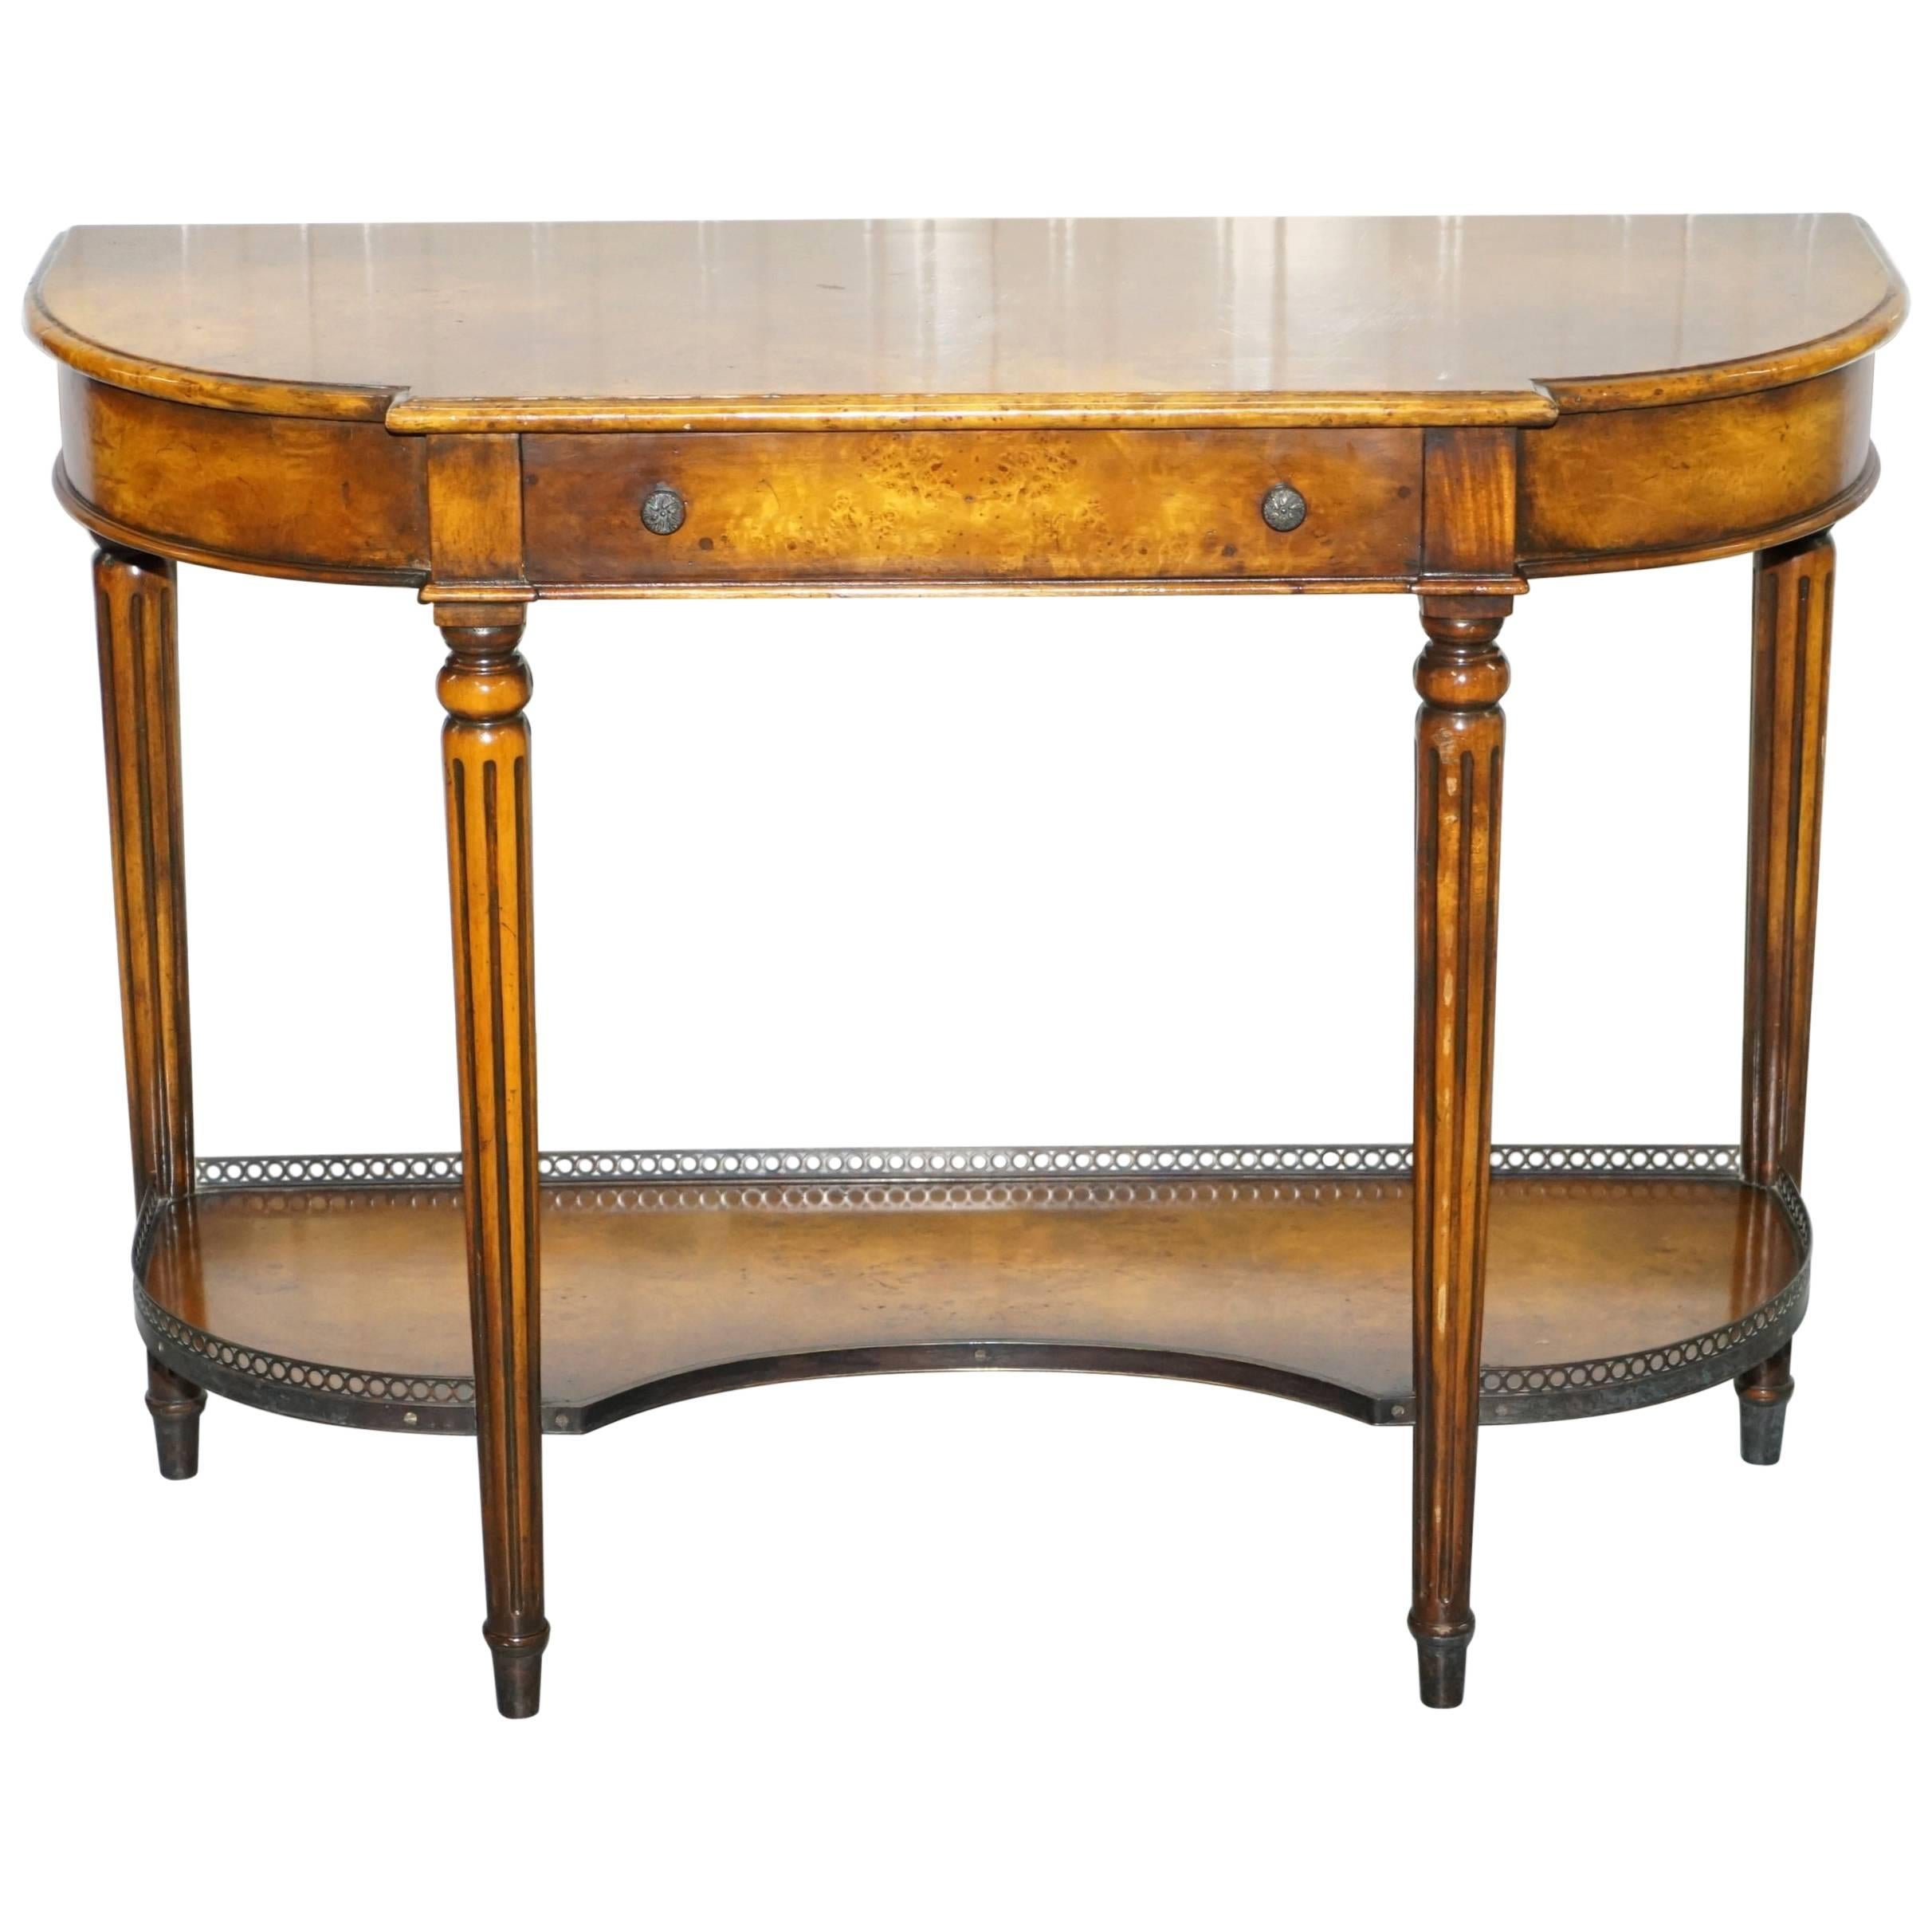 Stunning Burr Walnut Theodore Alexander Console Table with Single Drawers